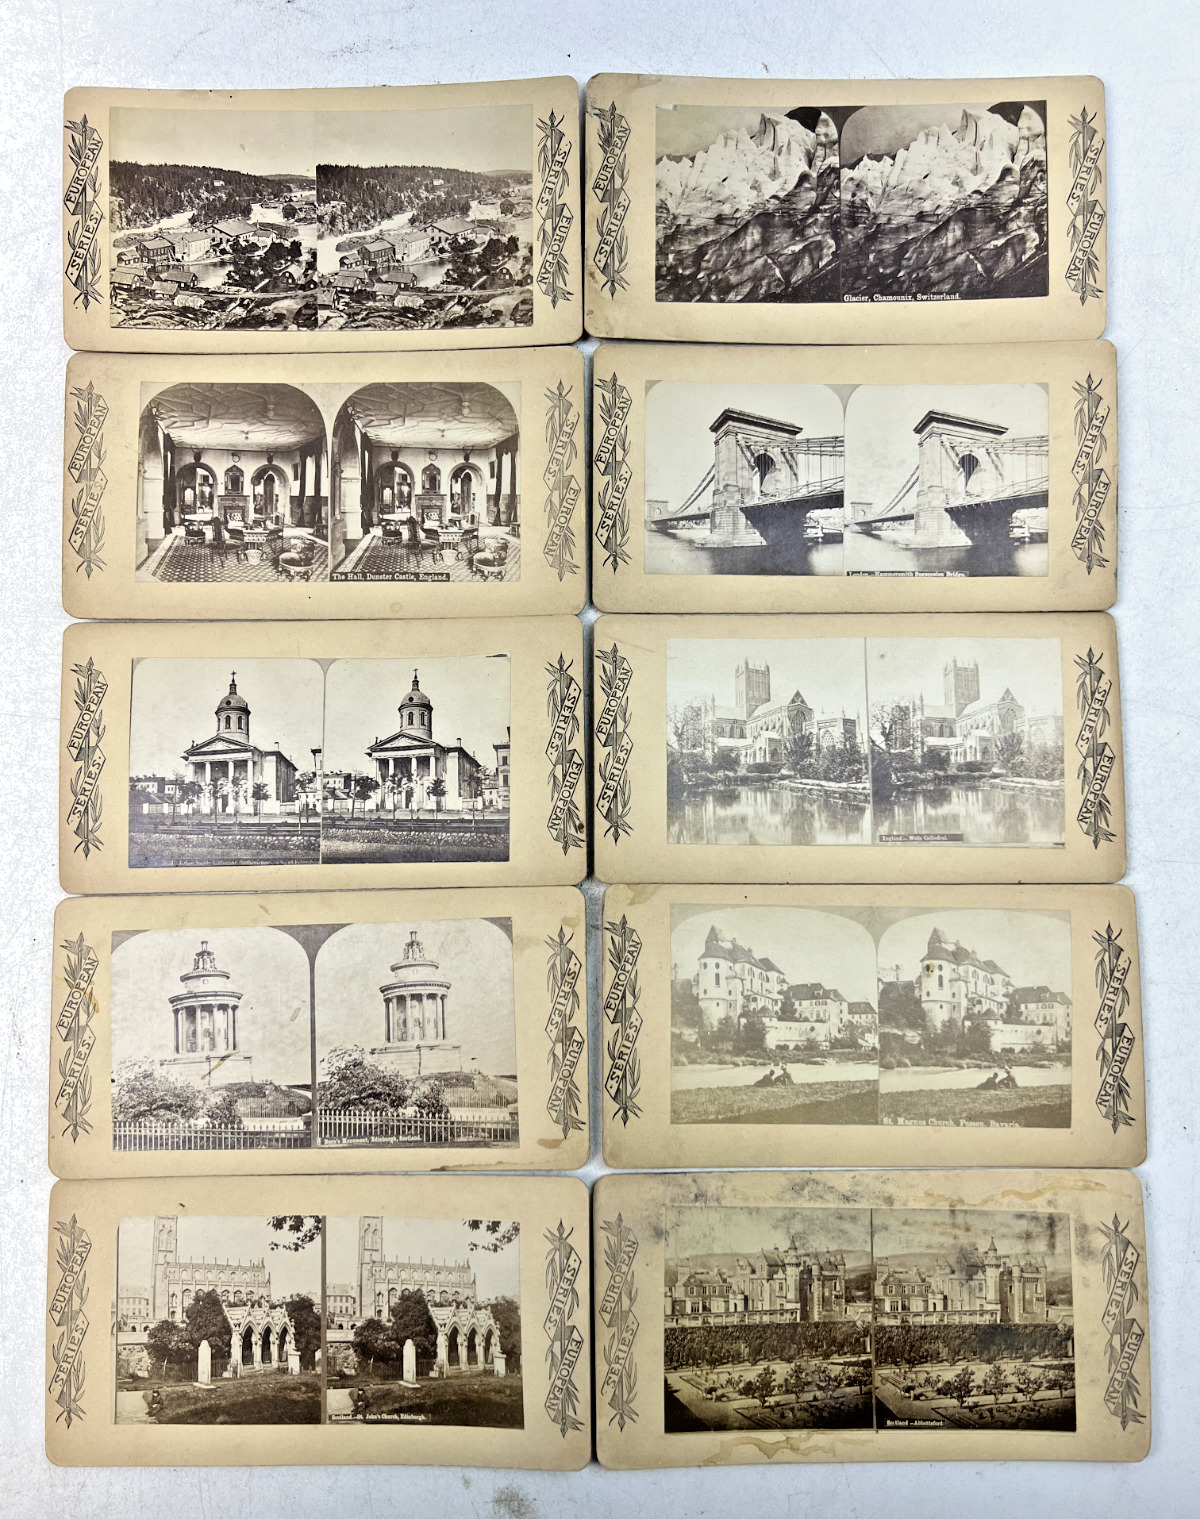 Antique European Series Stereoscope Viewer Cards - Lot of 10